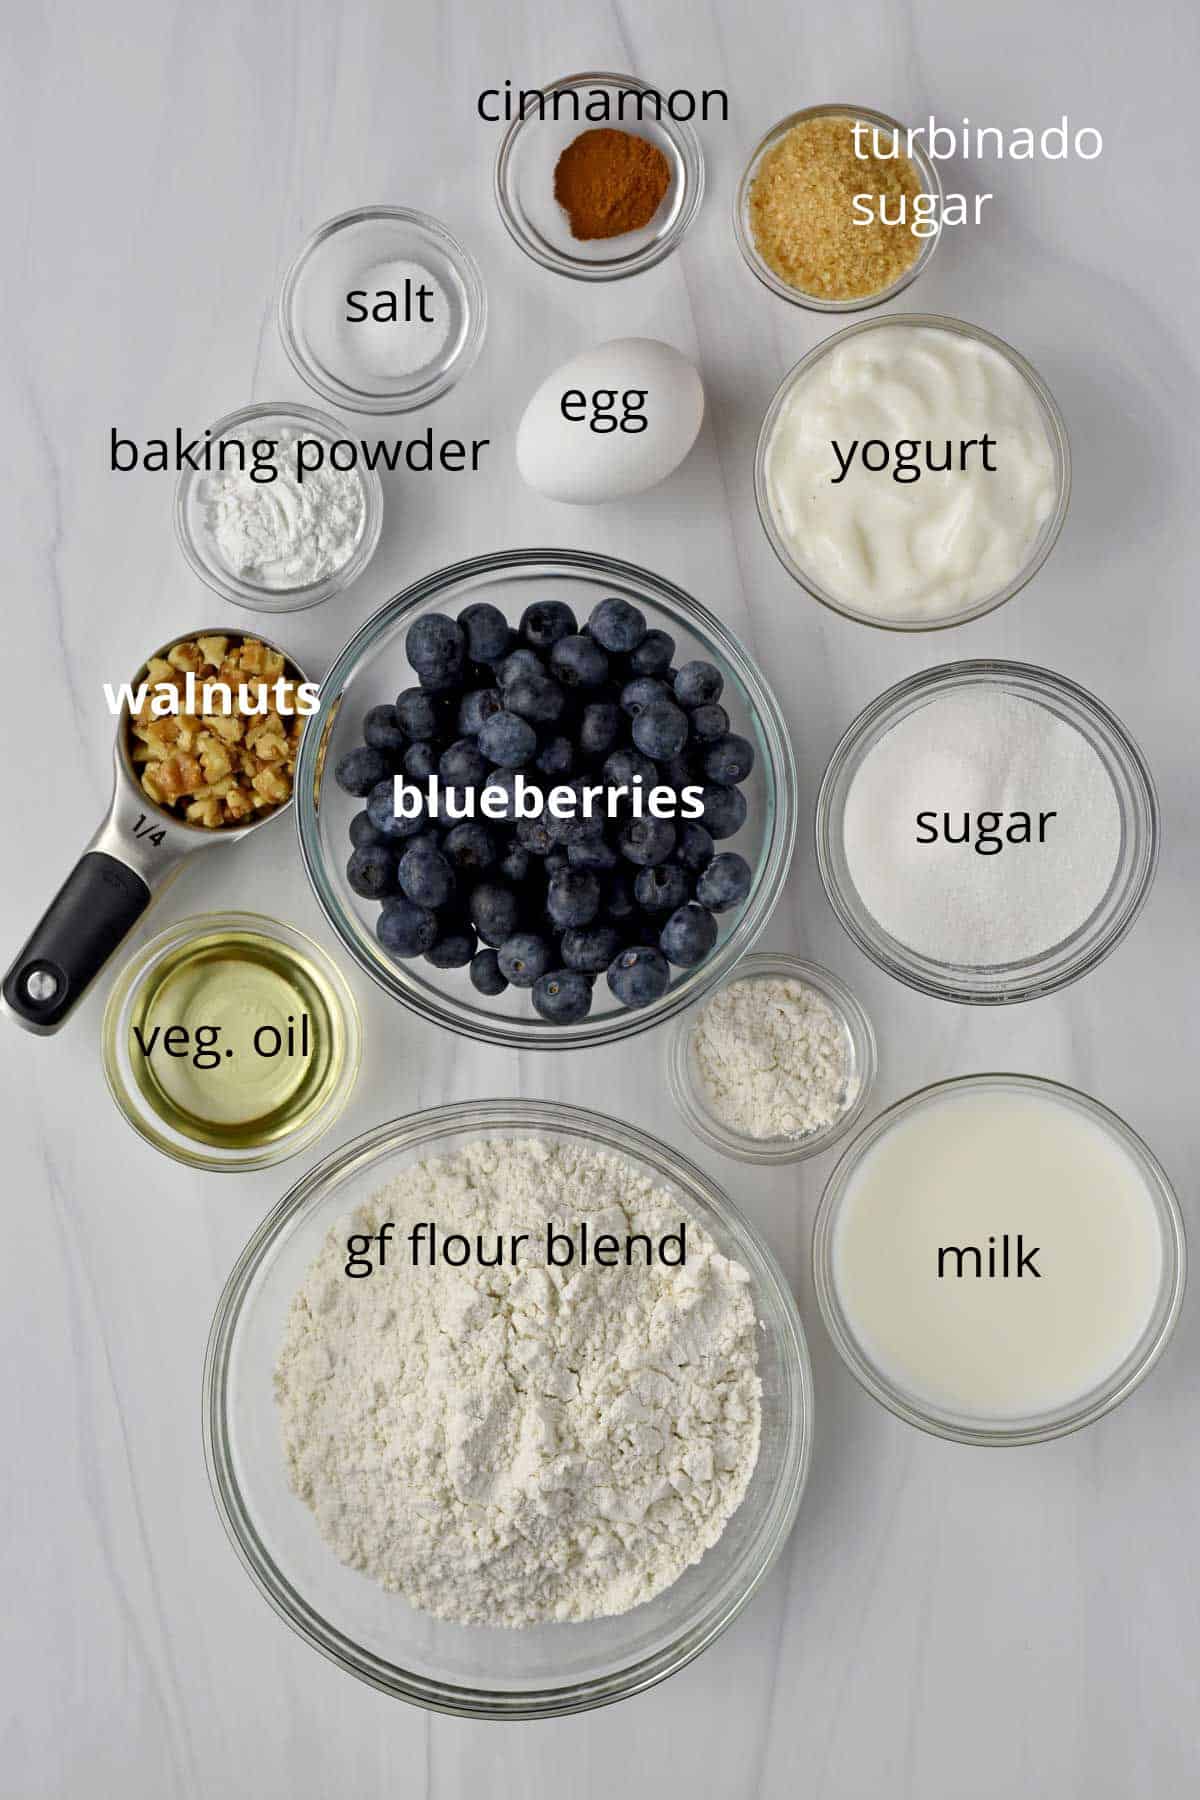 Ingredients, with labels, for gluten free blueberry cake.